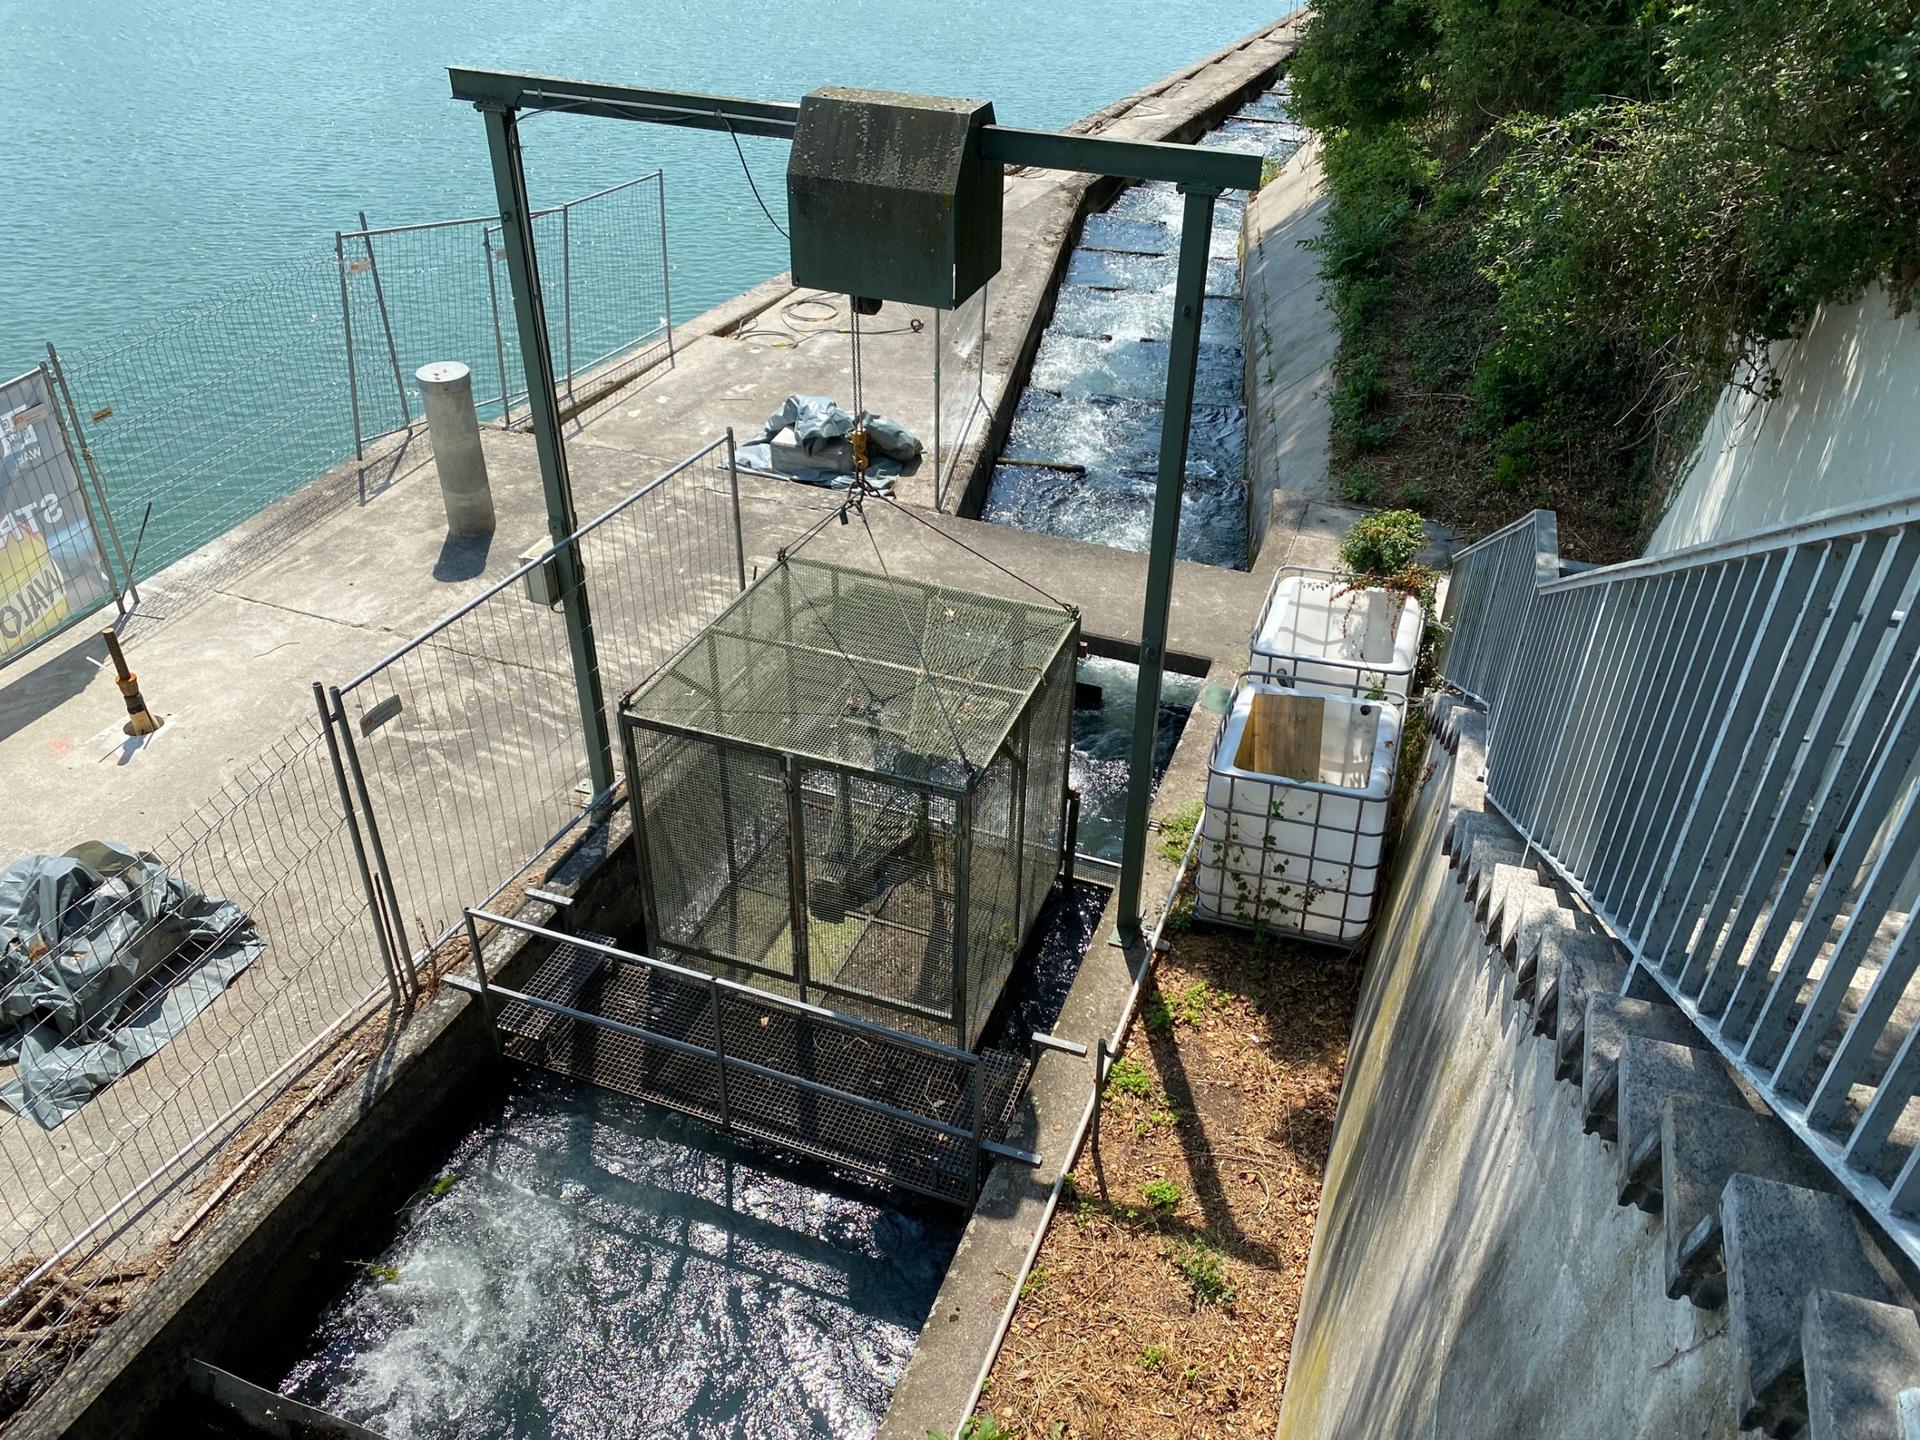 When fish pass through this ladder, they can be lifted in the cage for research purposes.